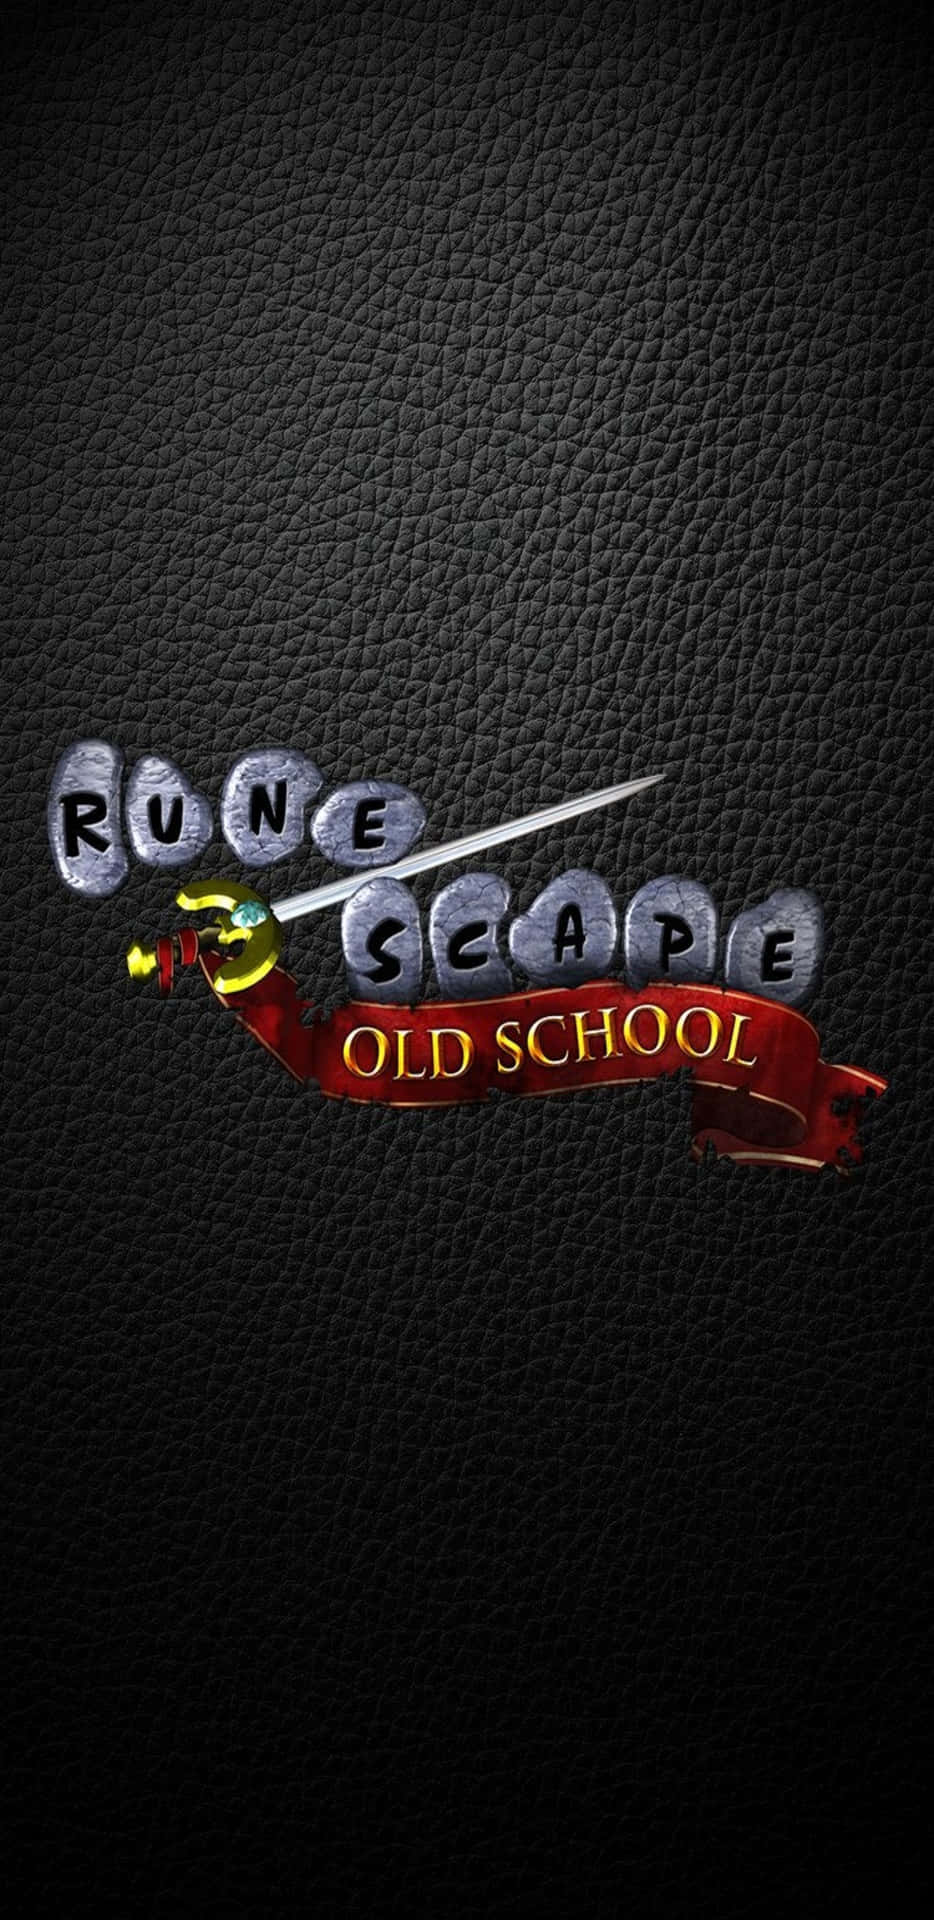 A Logo For Runescape Old School